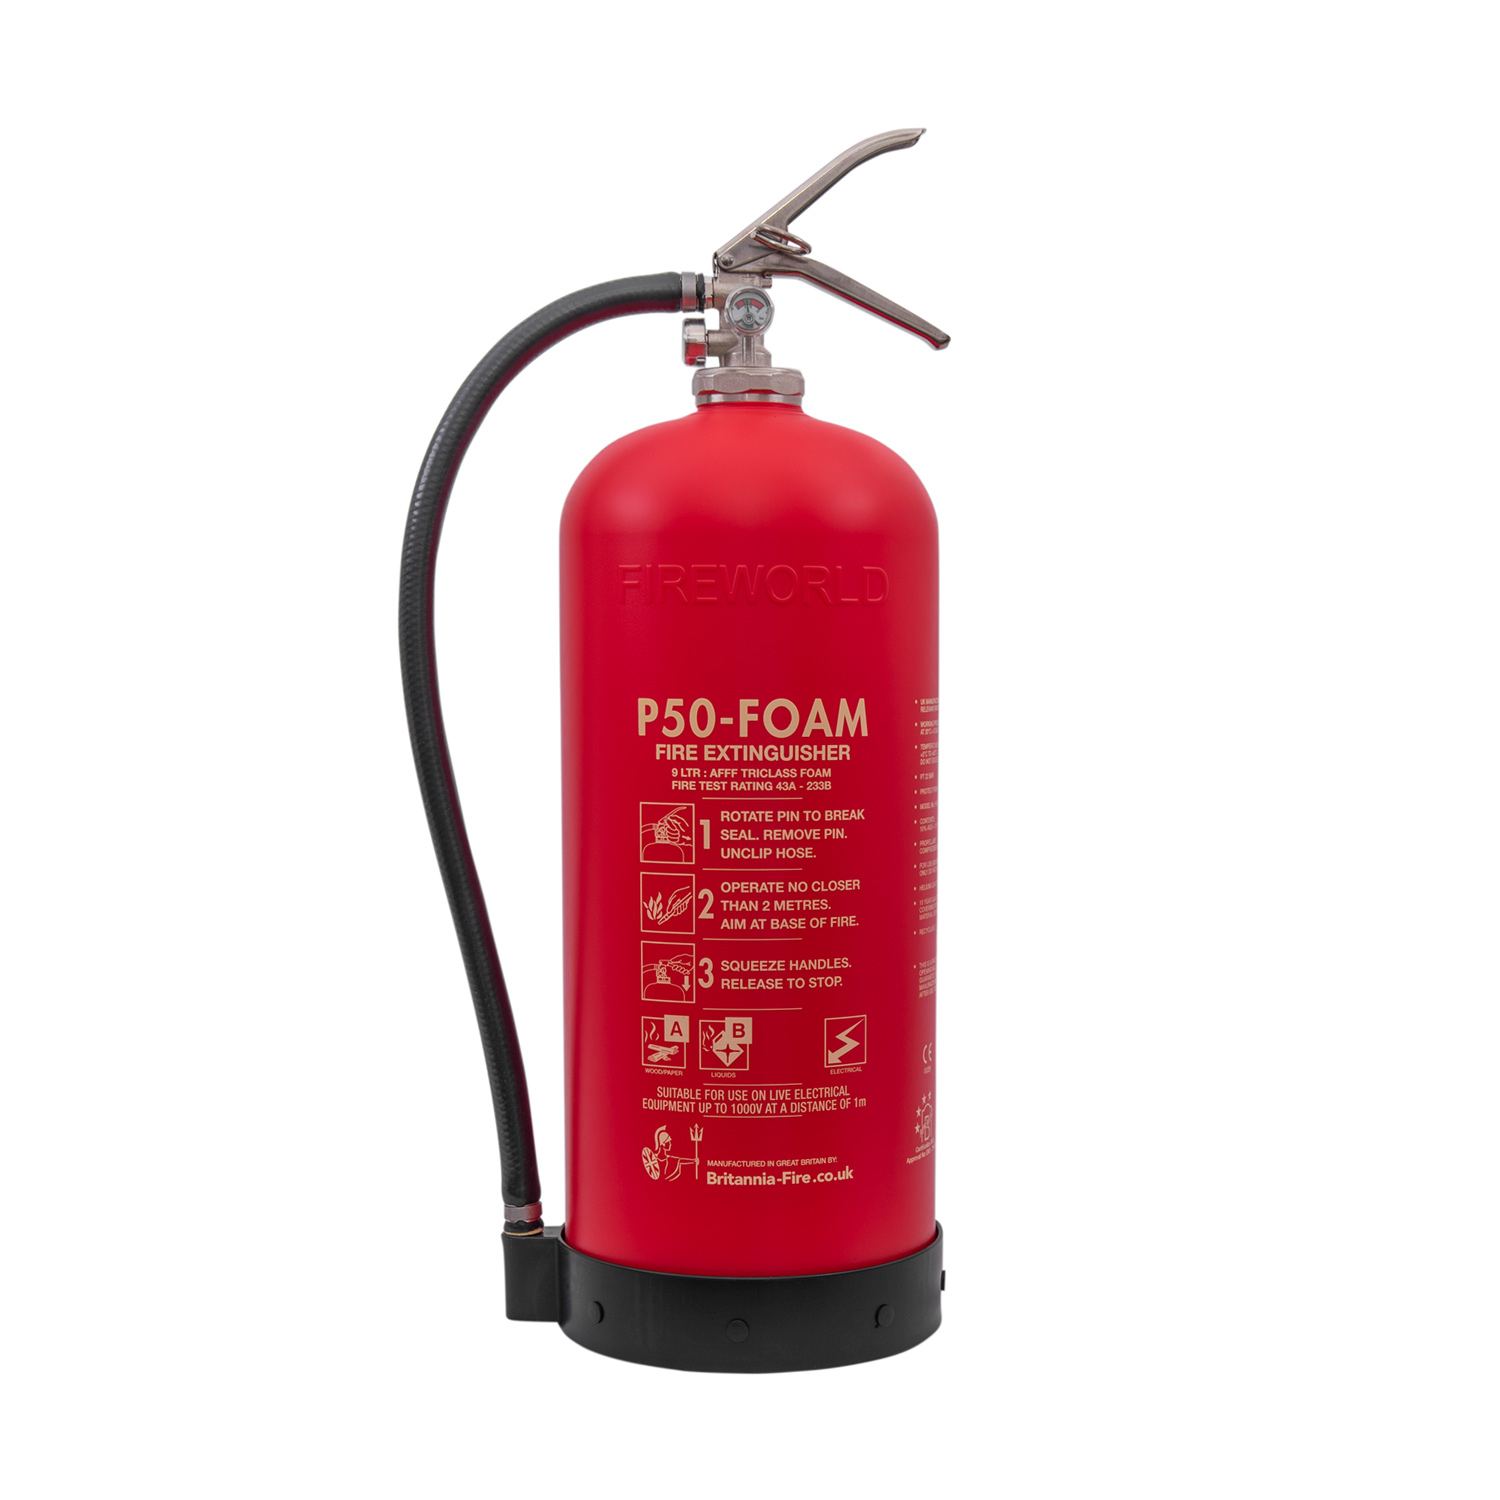 Image of the P50 9ltr Foam Fire Extinguisher